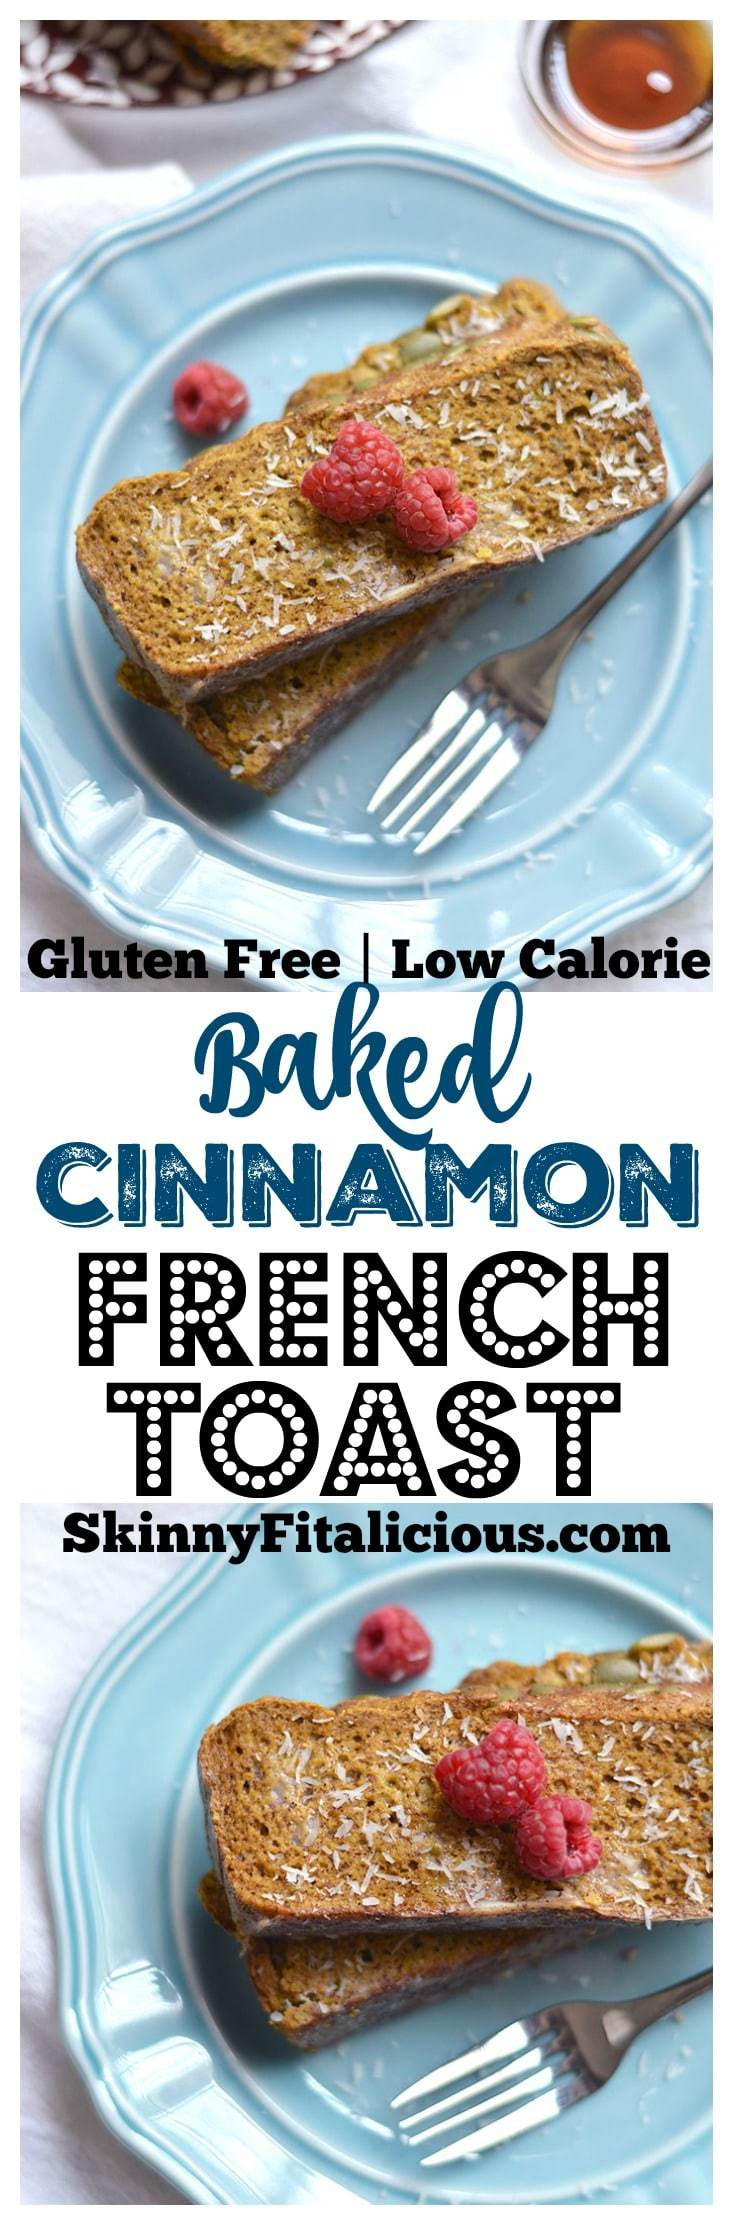 Healthy Baked French Toast
 Healthy Cinnamon Baked French Toast Paleo GF Low Cal